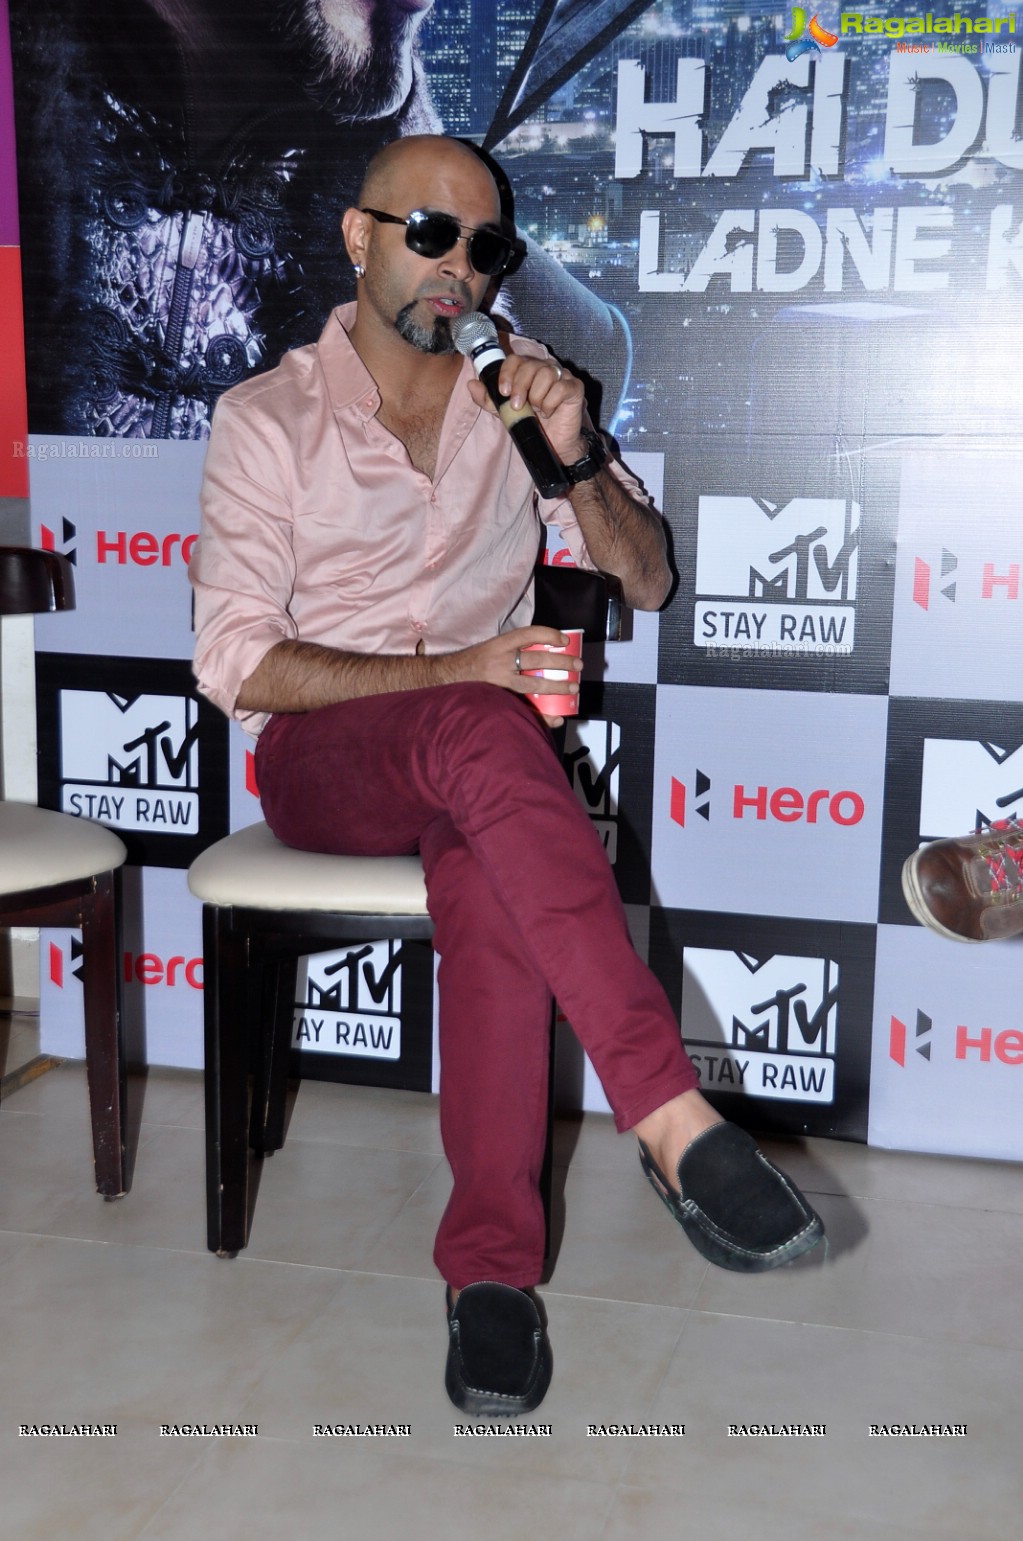 MTV Hero Roadies X – Battle For Glory! Auditions Comes To Hyderabad